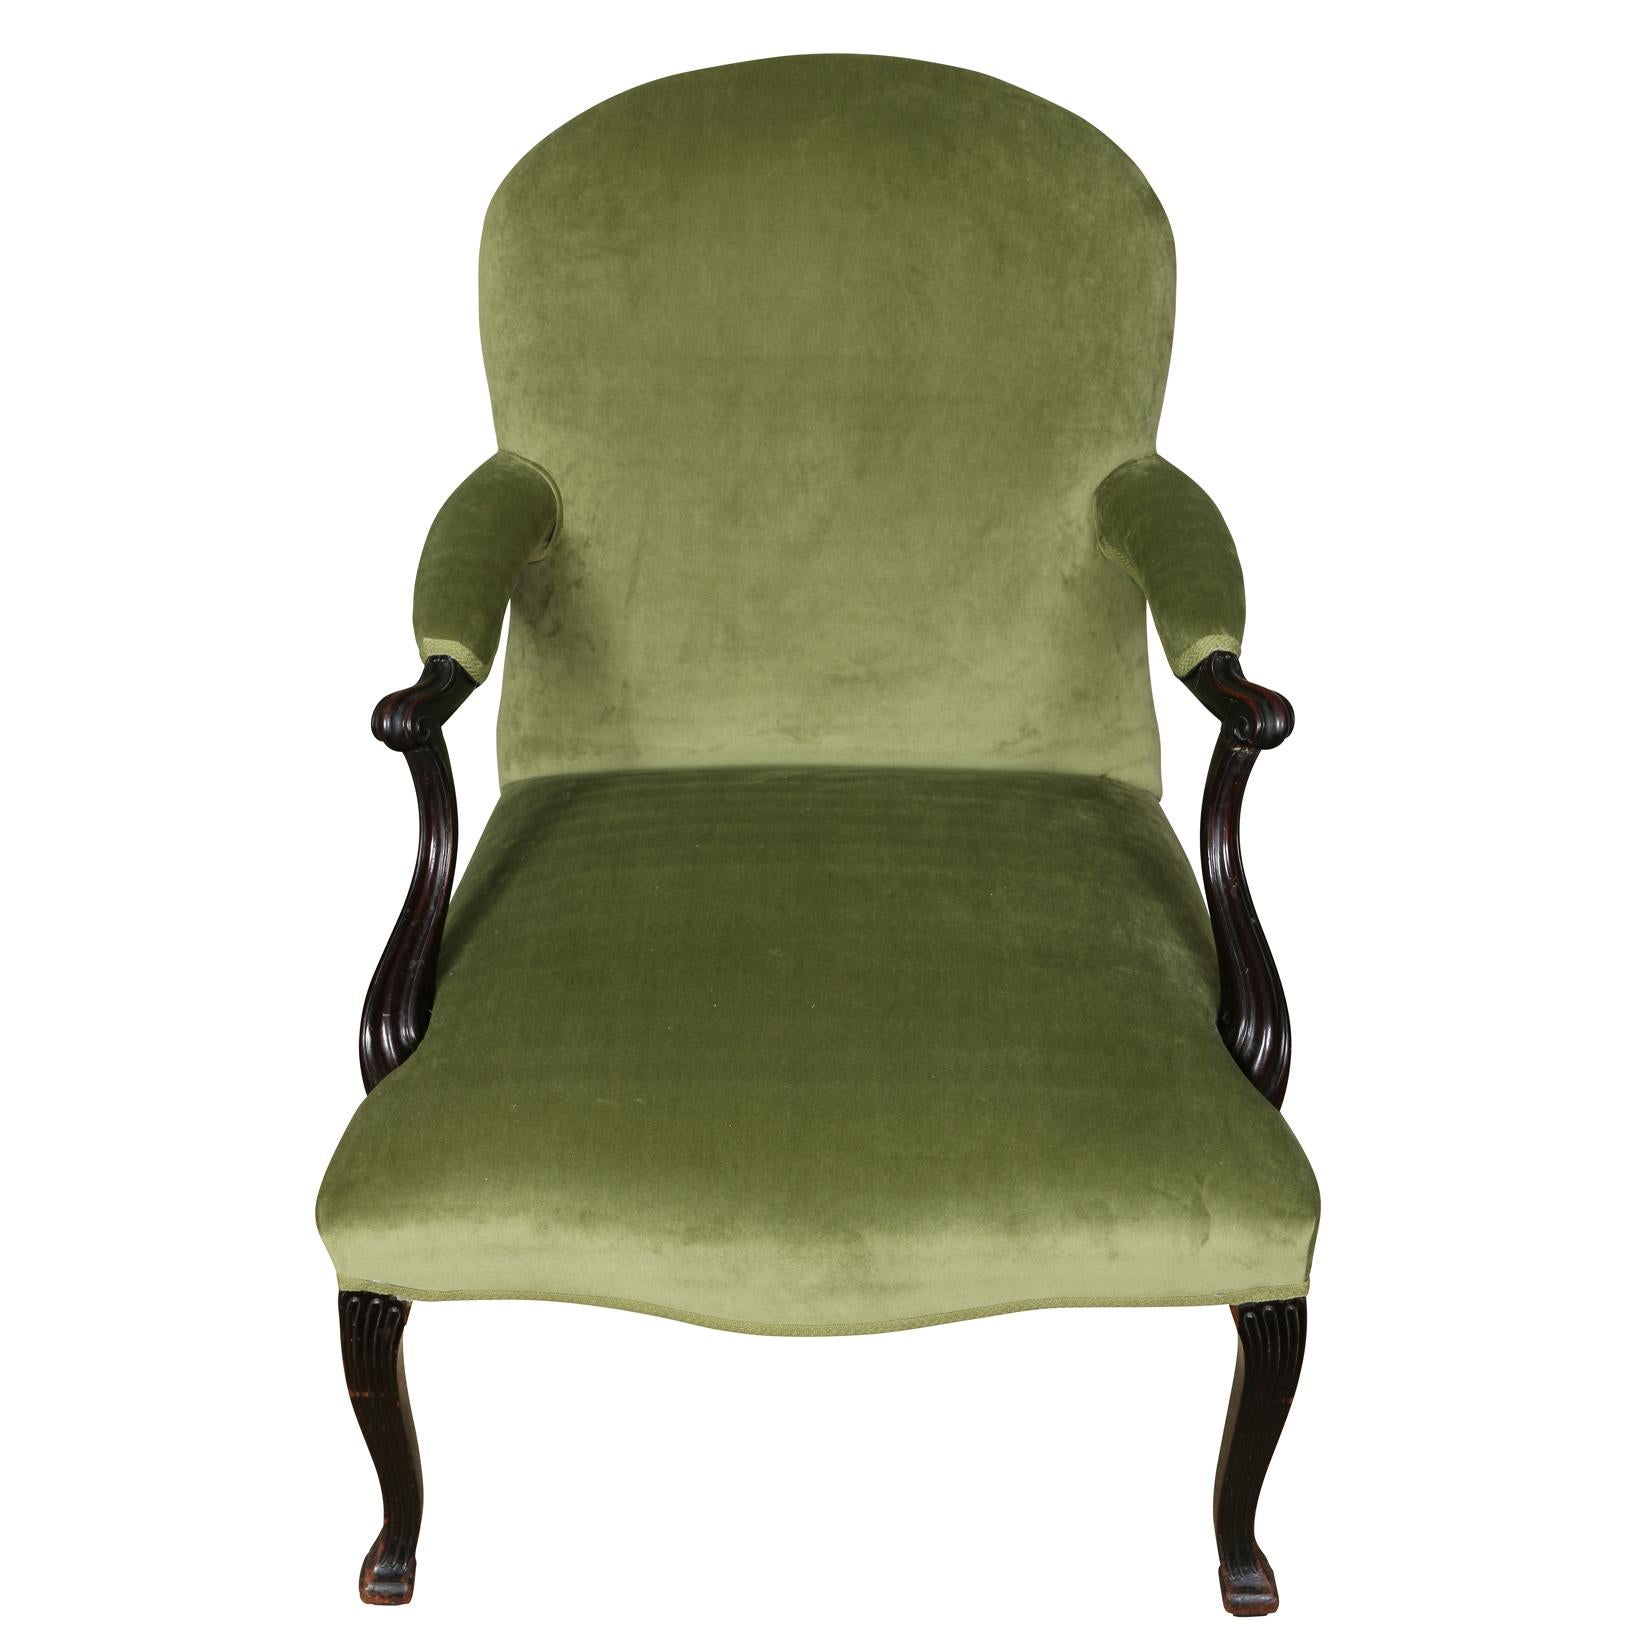 20th Century Louis XV Style Arm Chair Newly Upholstered in Green Velvet